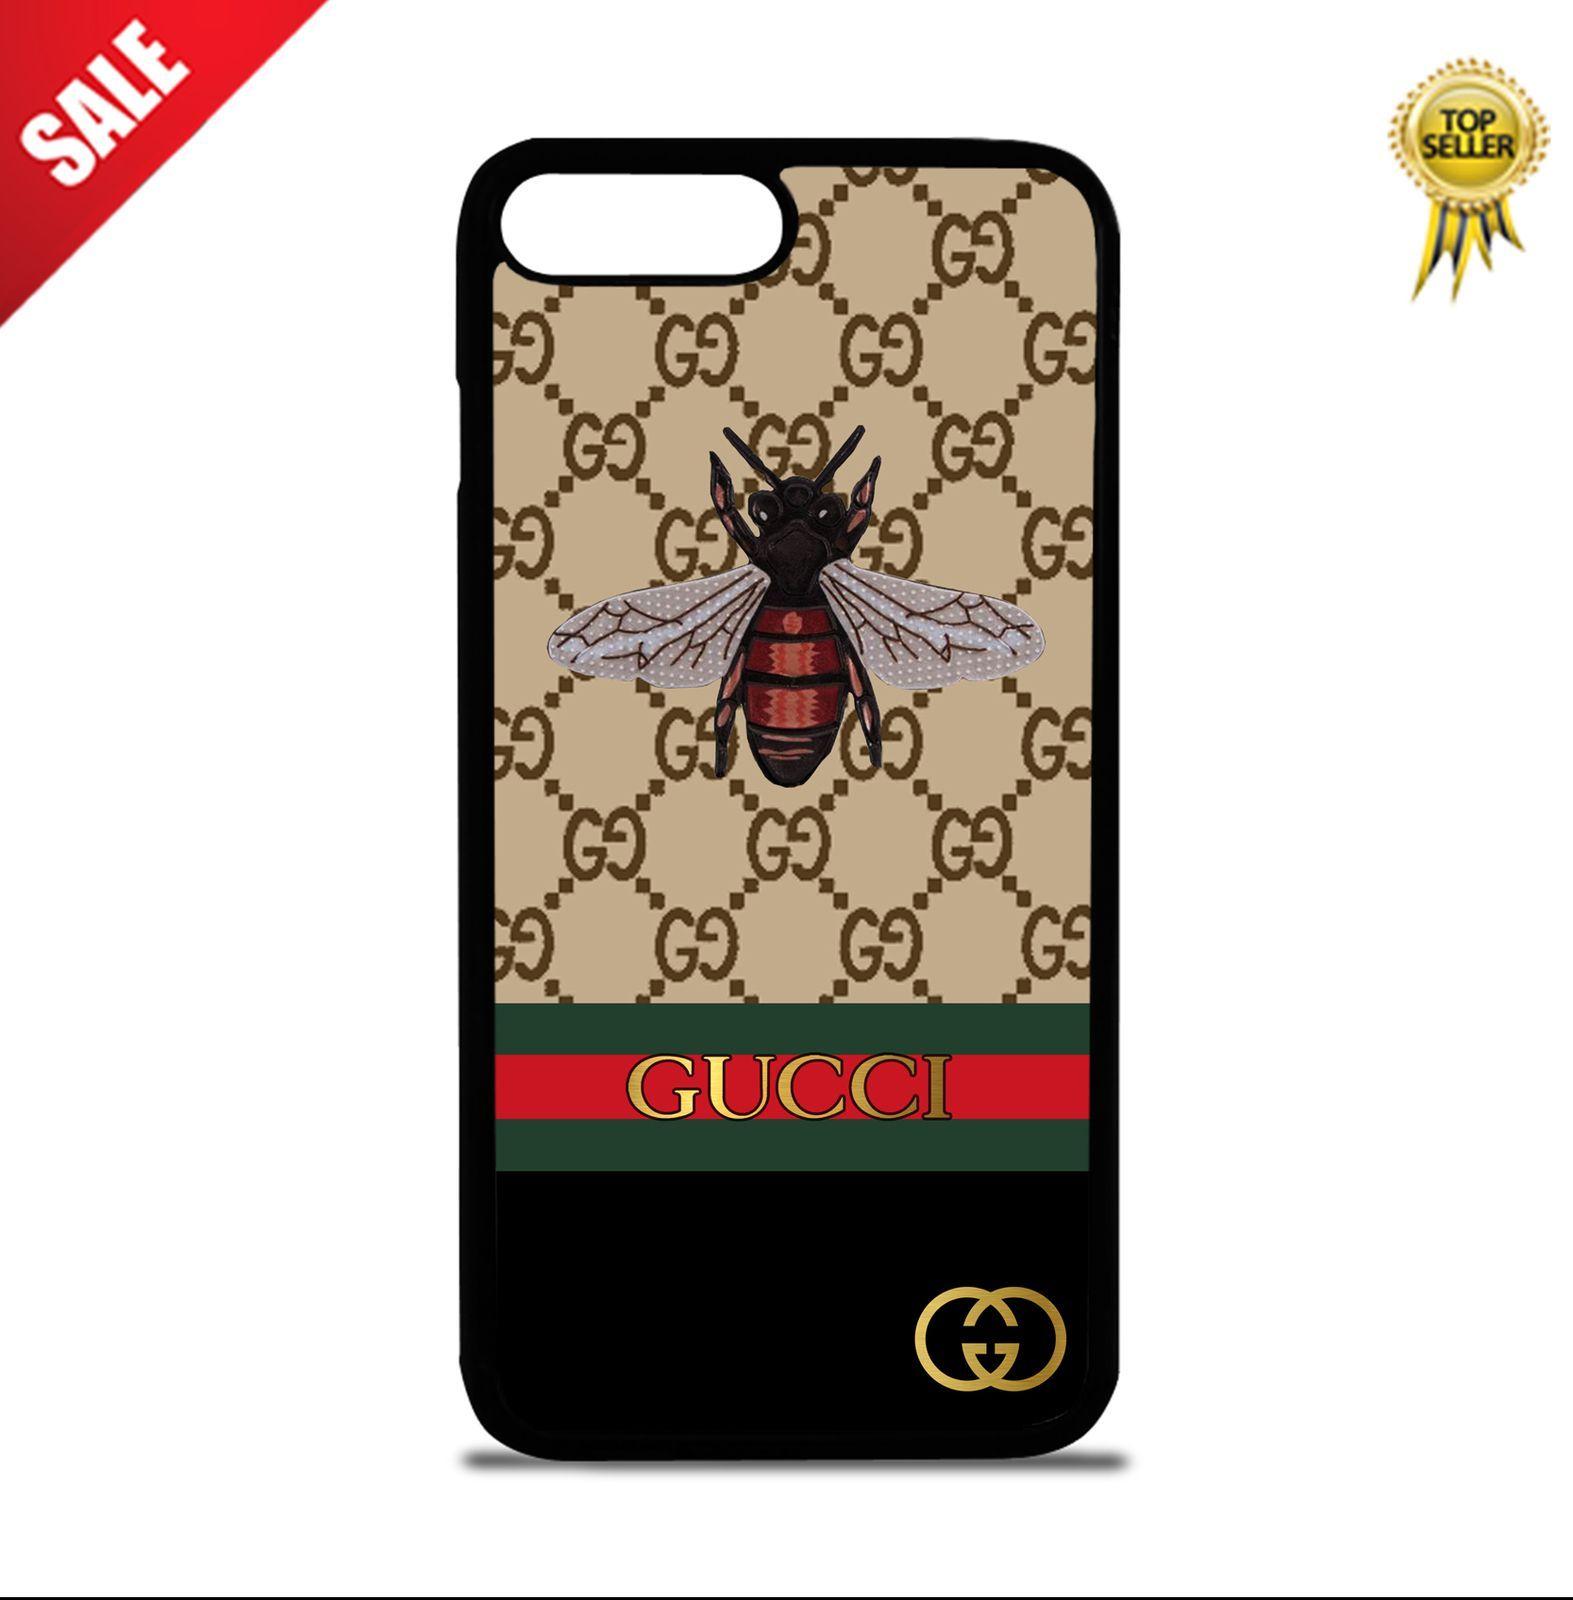 Gucci Bee Logo - Bee Gucci Gold Logo Black Stripe Case For iPhone 5 5s 6 6Plus 7